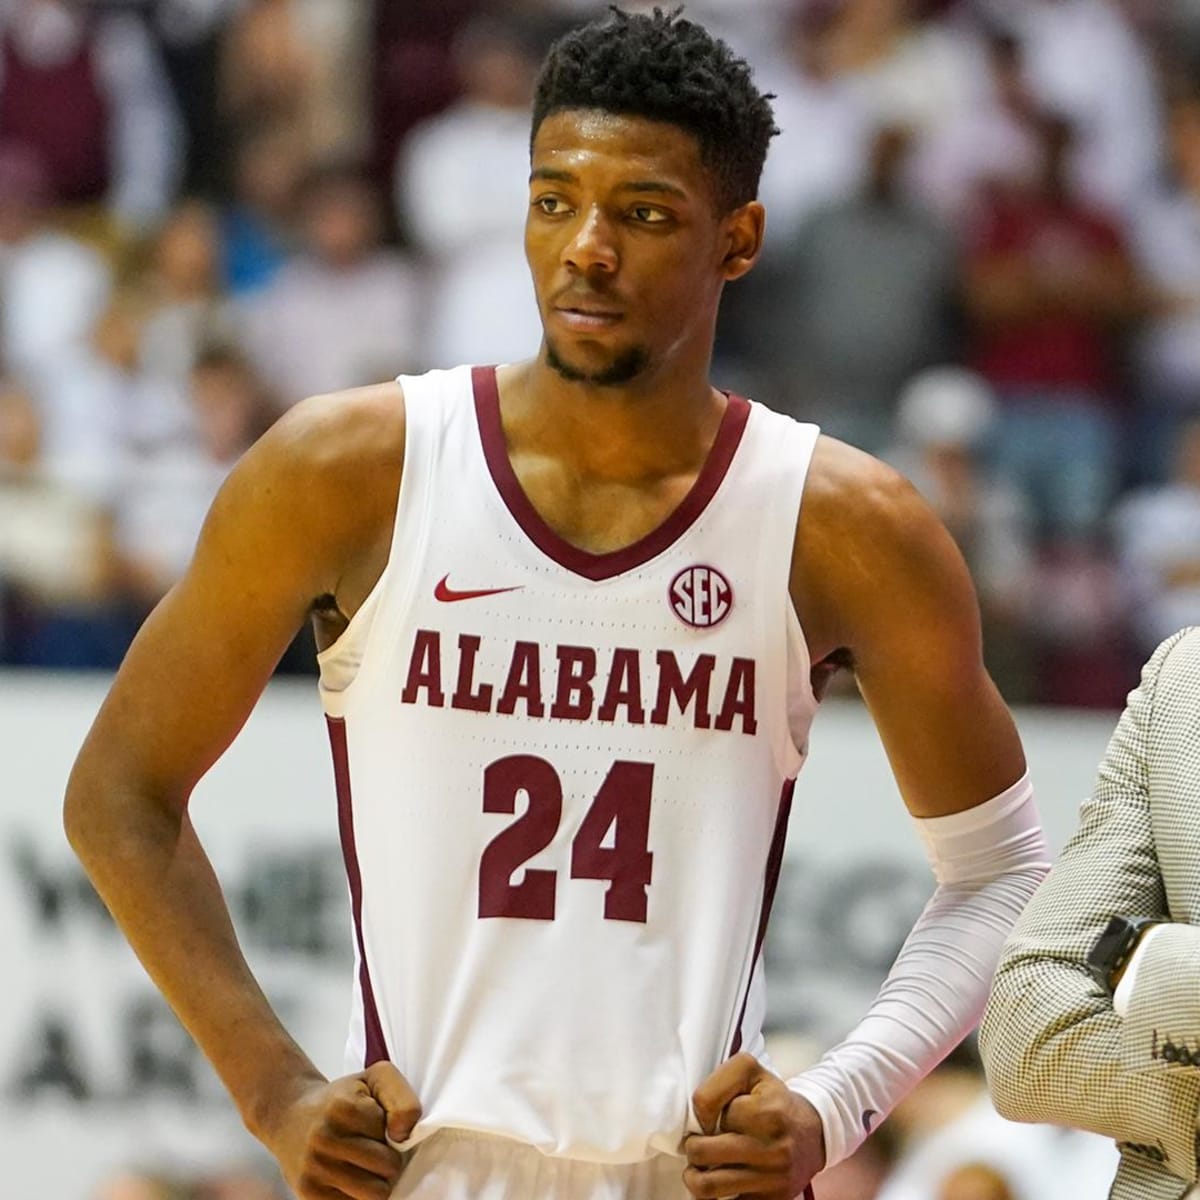 Brandon Miller “pat down” latest example of Alabama's indifference - Sports Illustrated